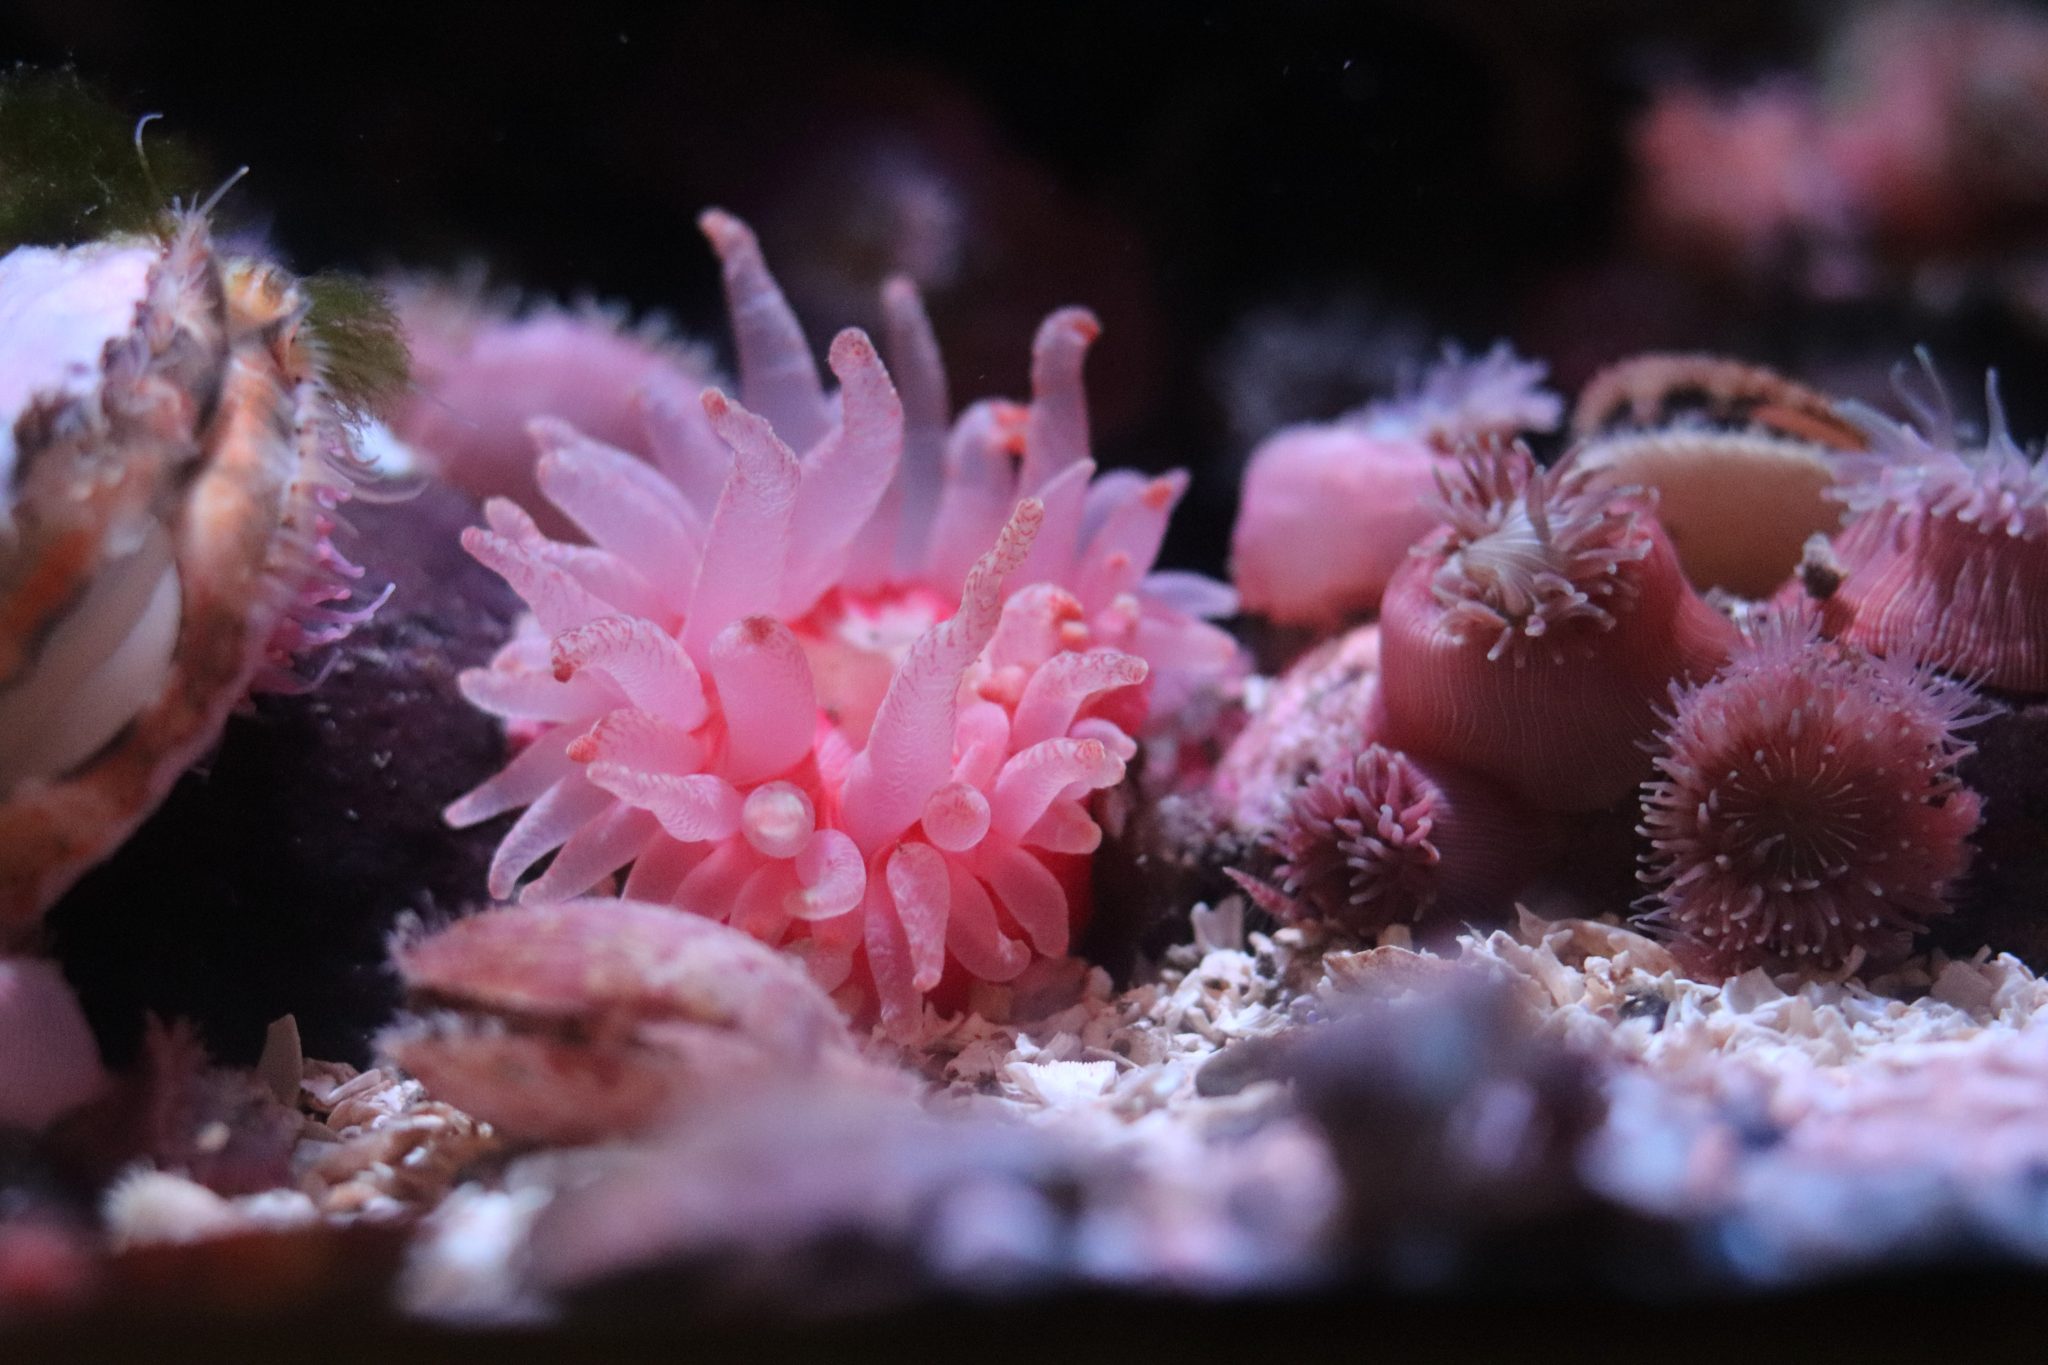 A light pink polyp that looks similar to a sea anemone